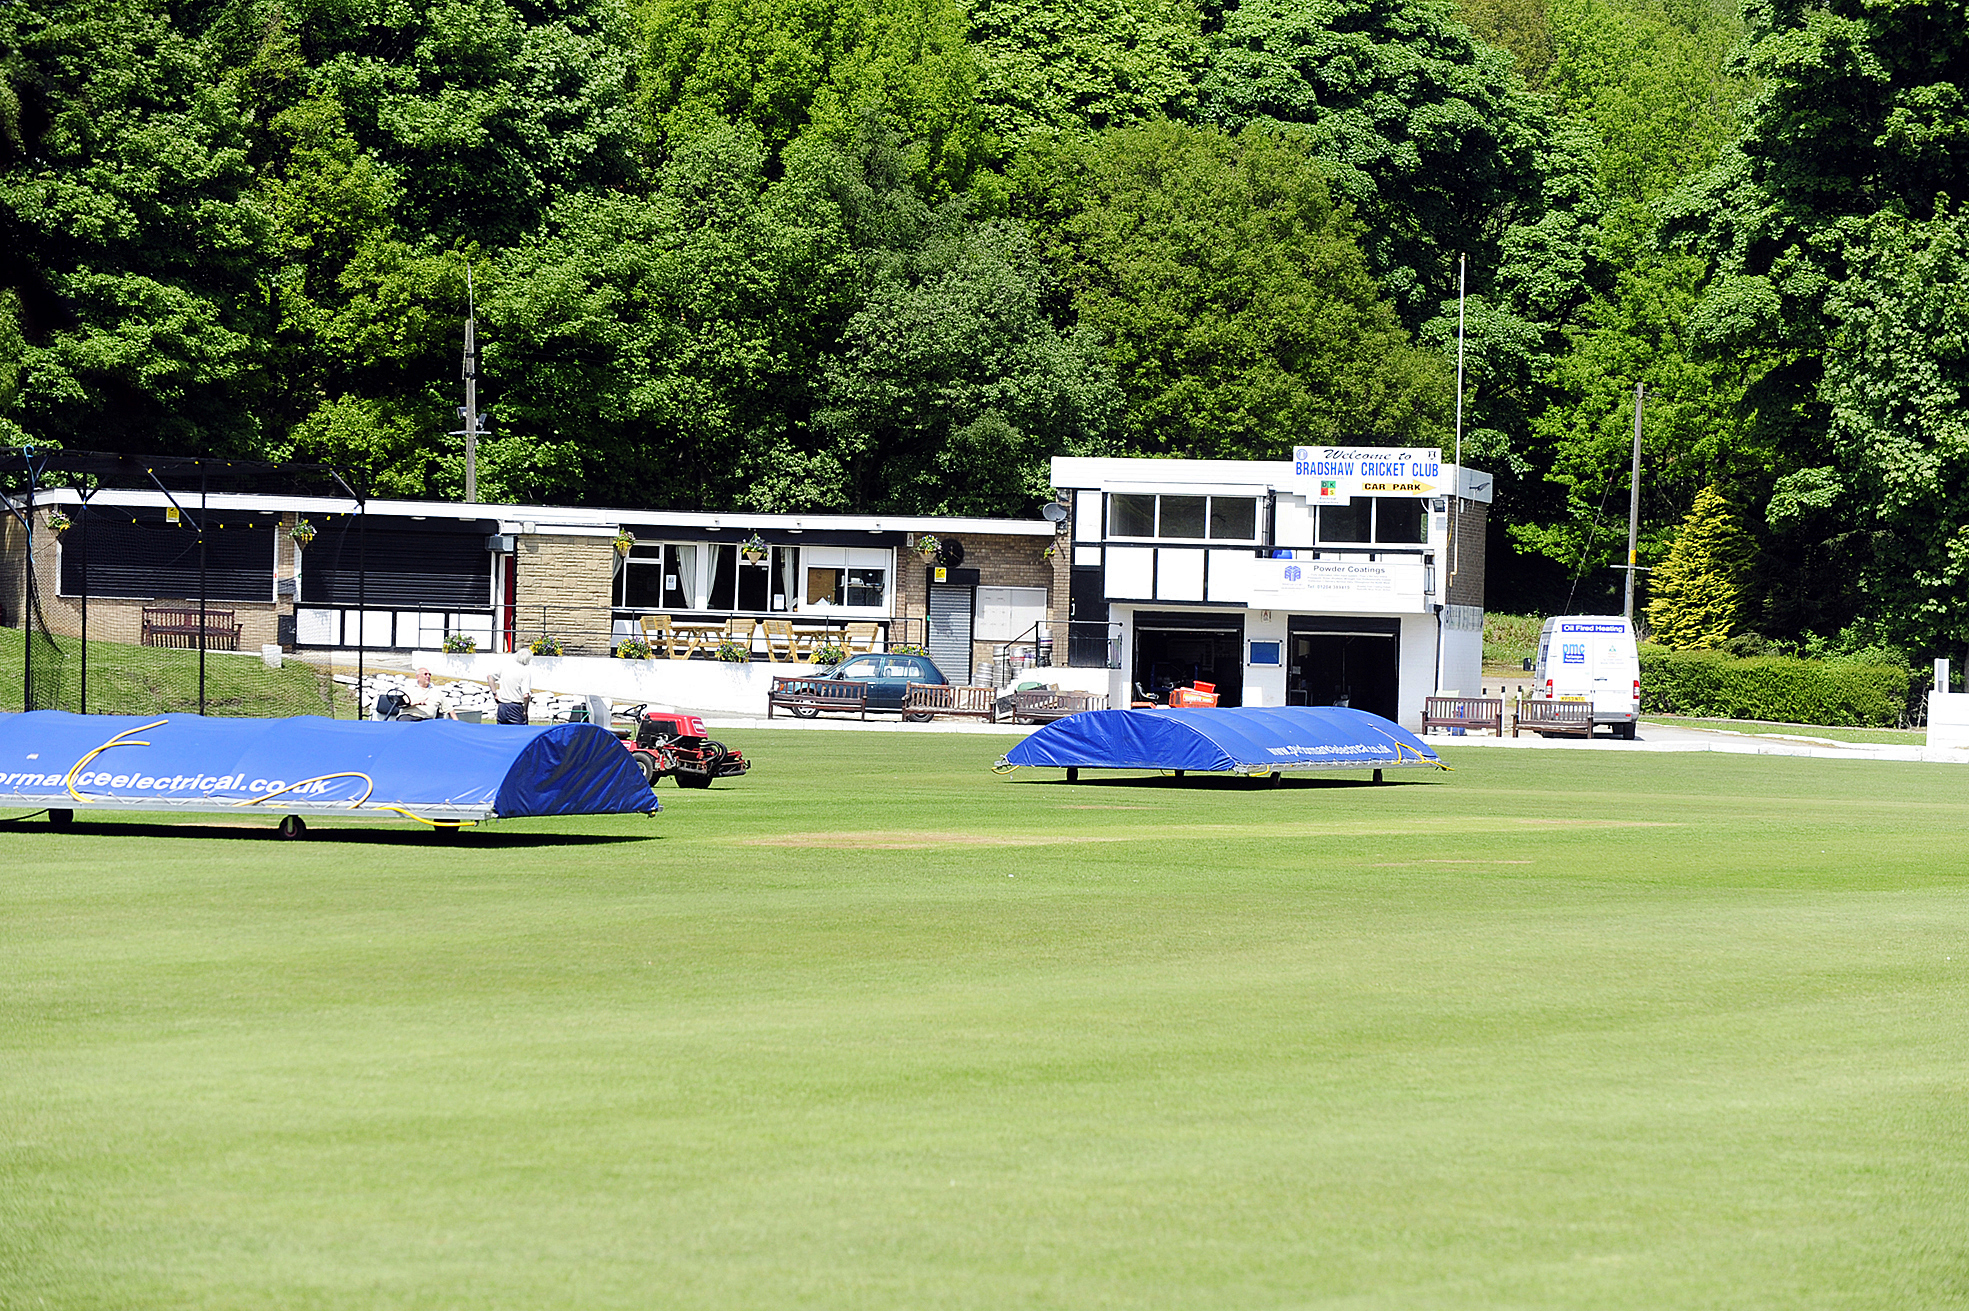 Cricket club facing "constant battle" after vandals strike again